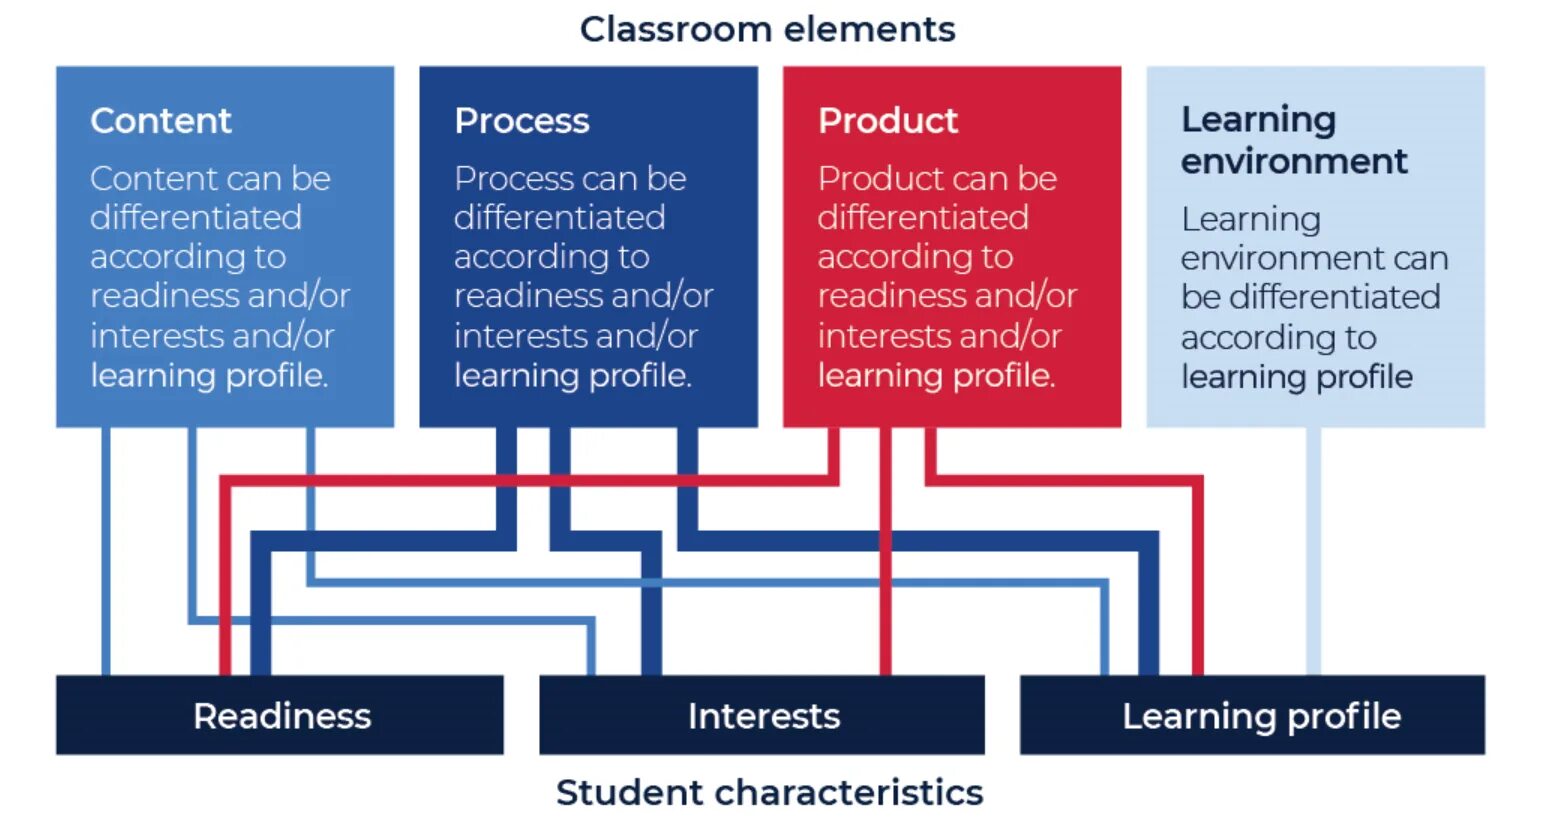 Differentiated Learning. Product differentiation. Differentiation in teaching. Differentiation method.